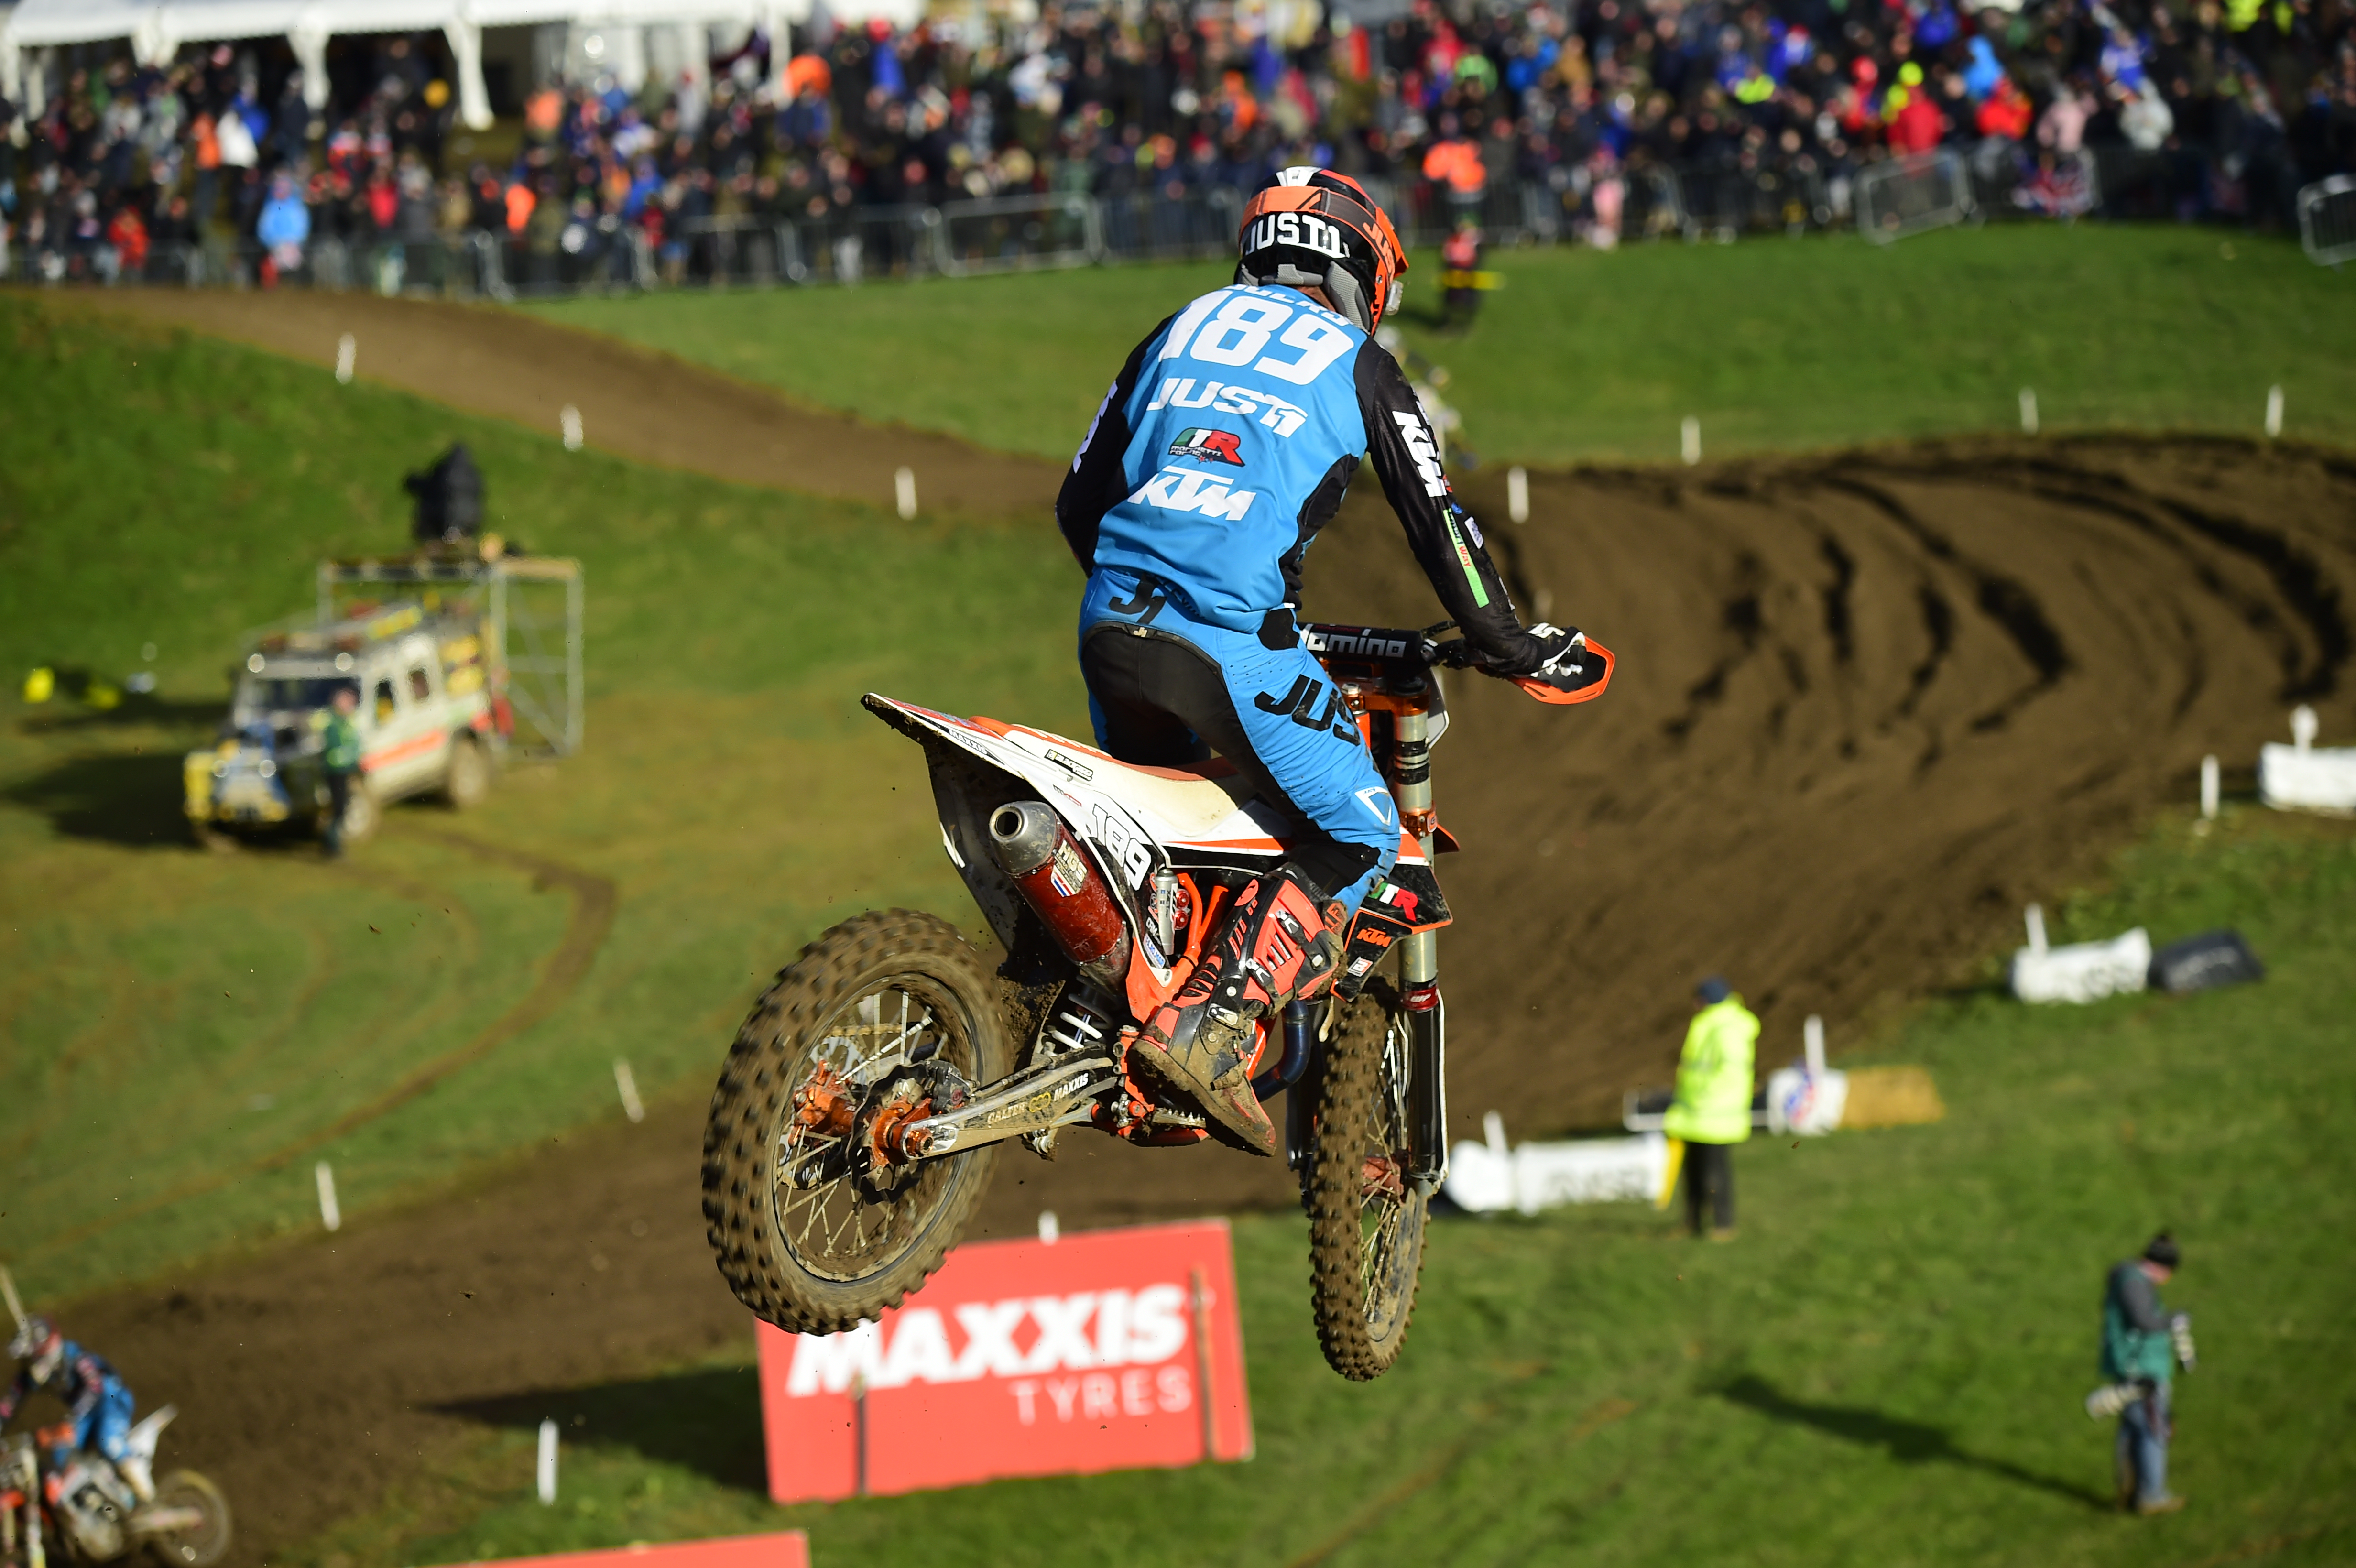 Best Motocross Tracks in North West England